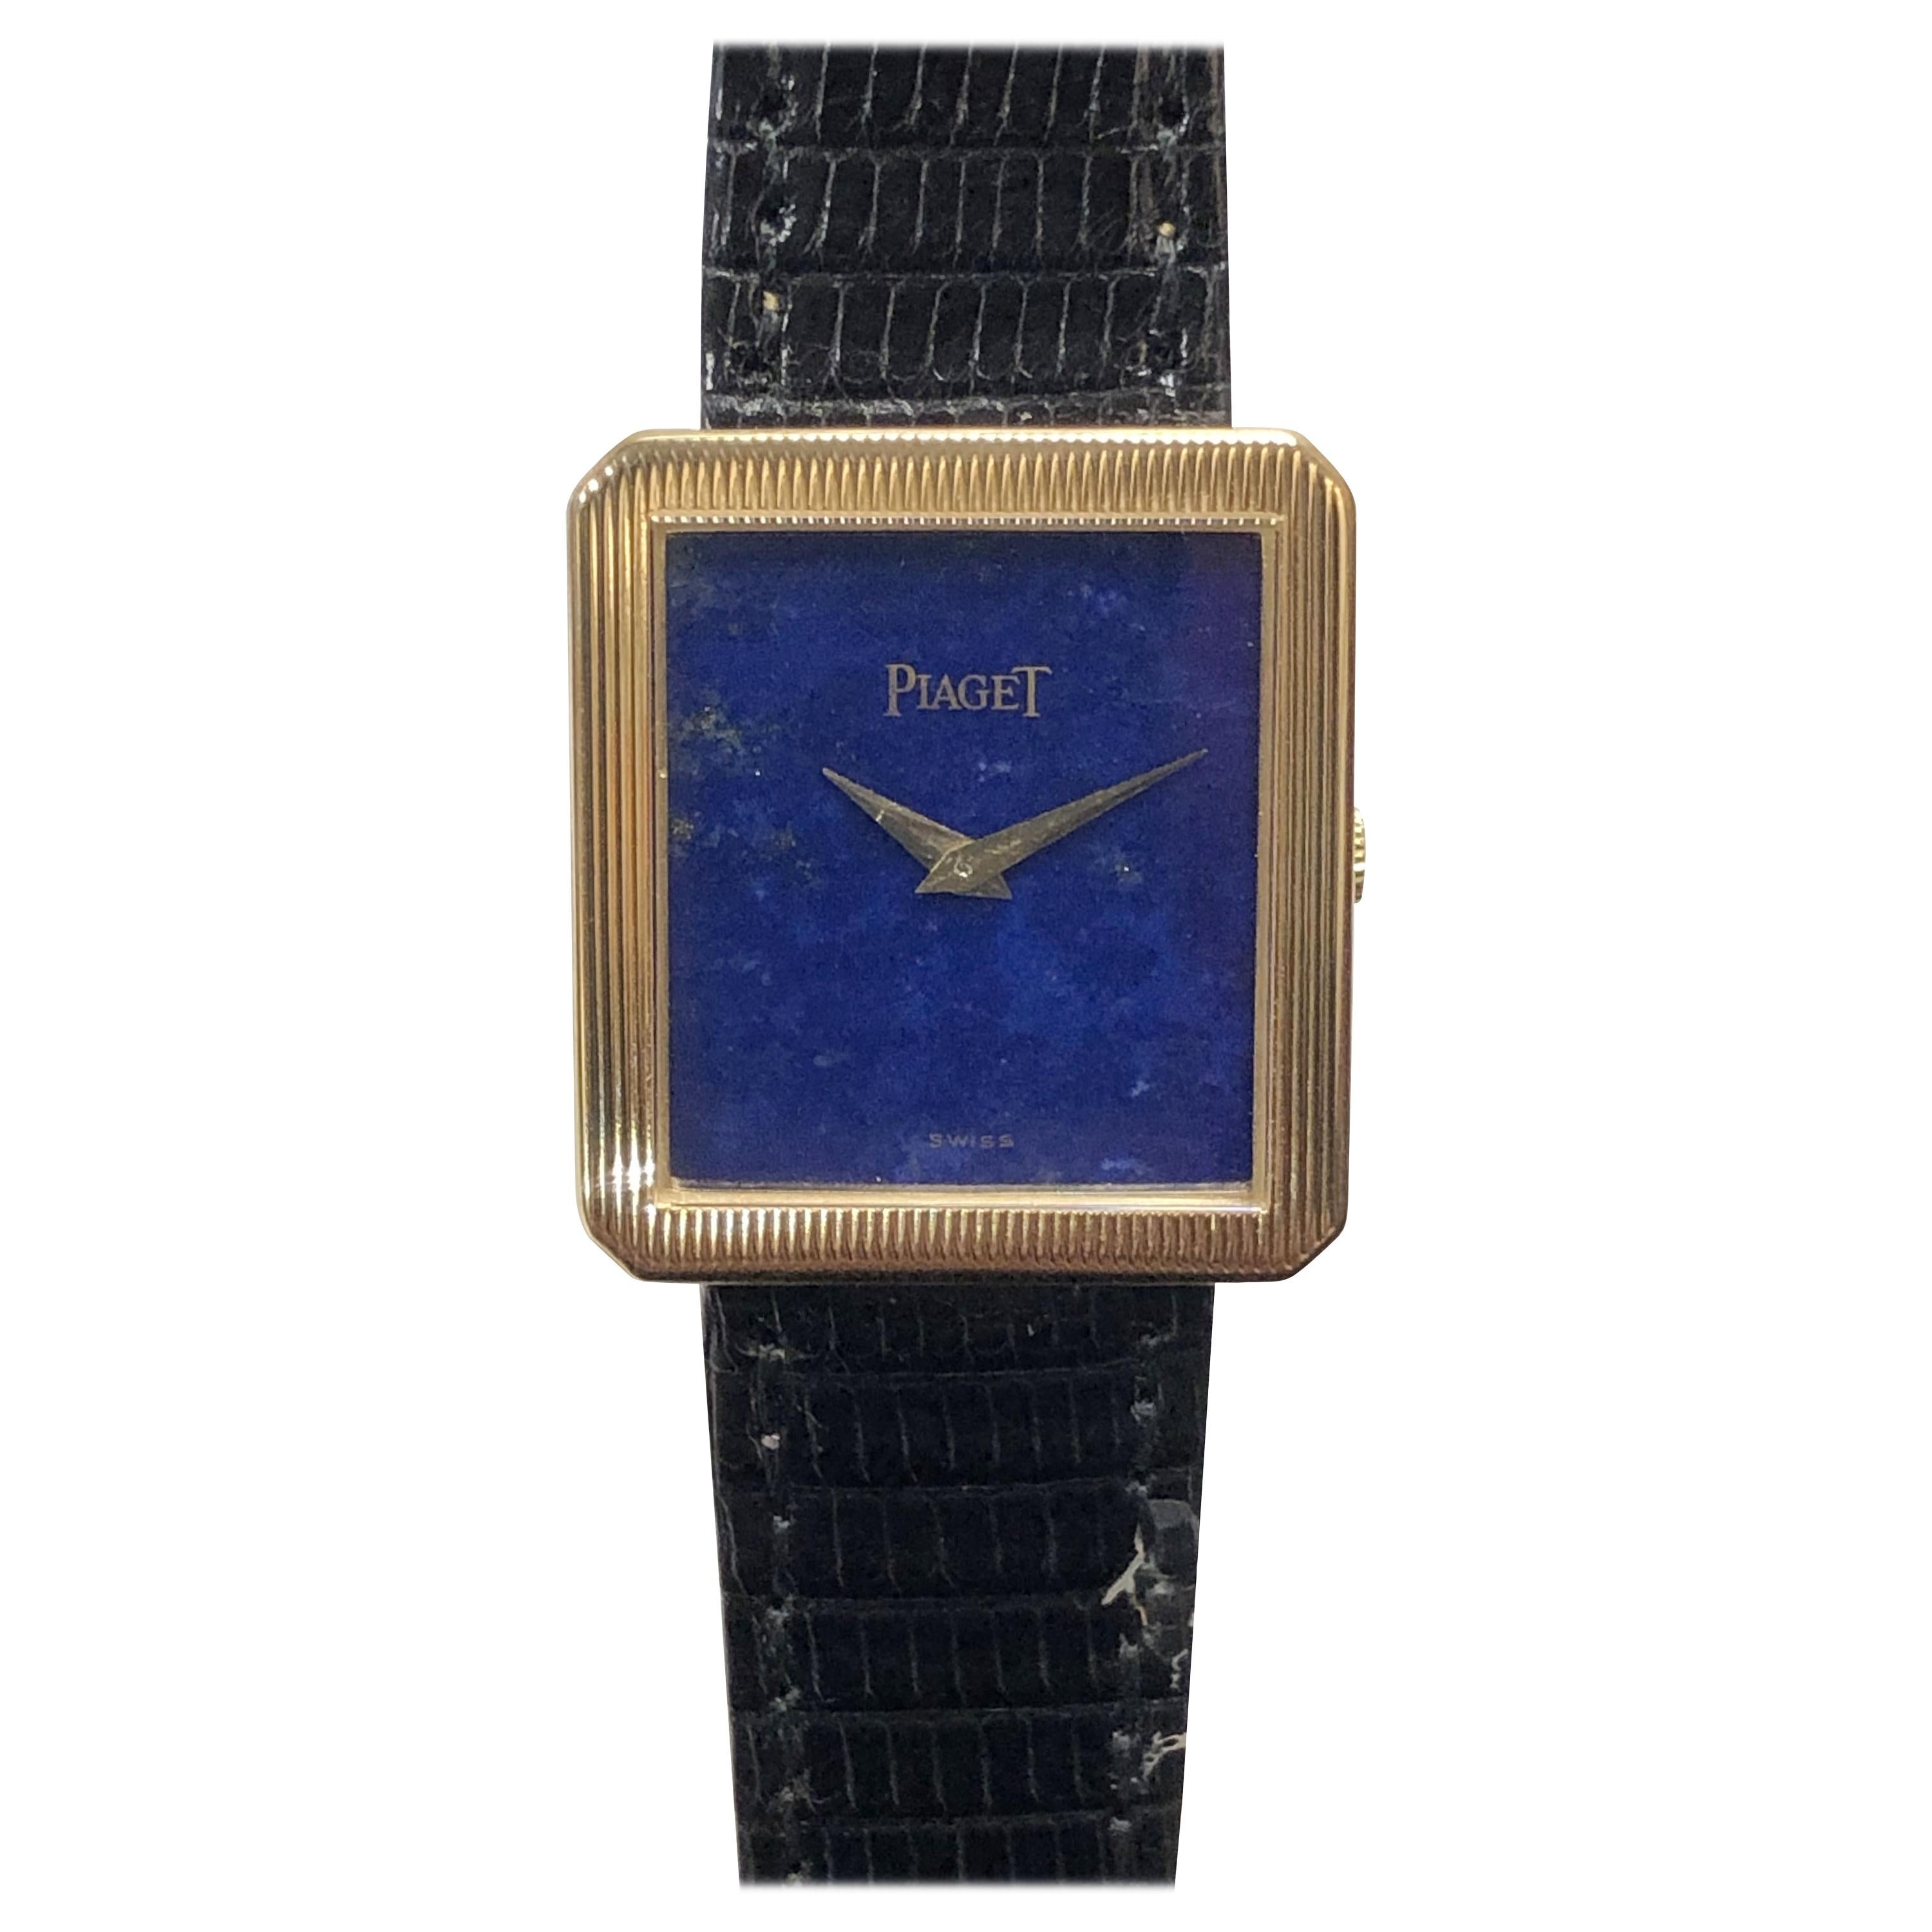 Piaget Gold and Lapis Lazuli stone Dial Mechanical Gents Wrist Watch